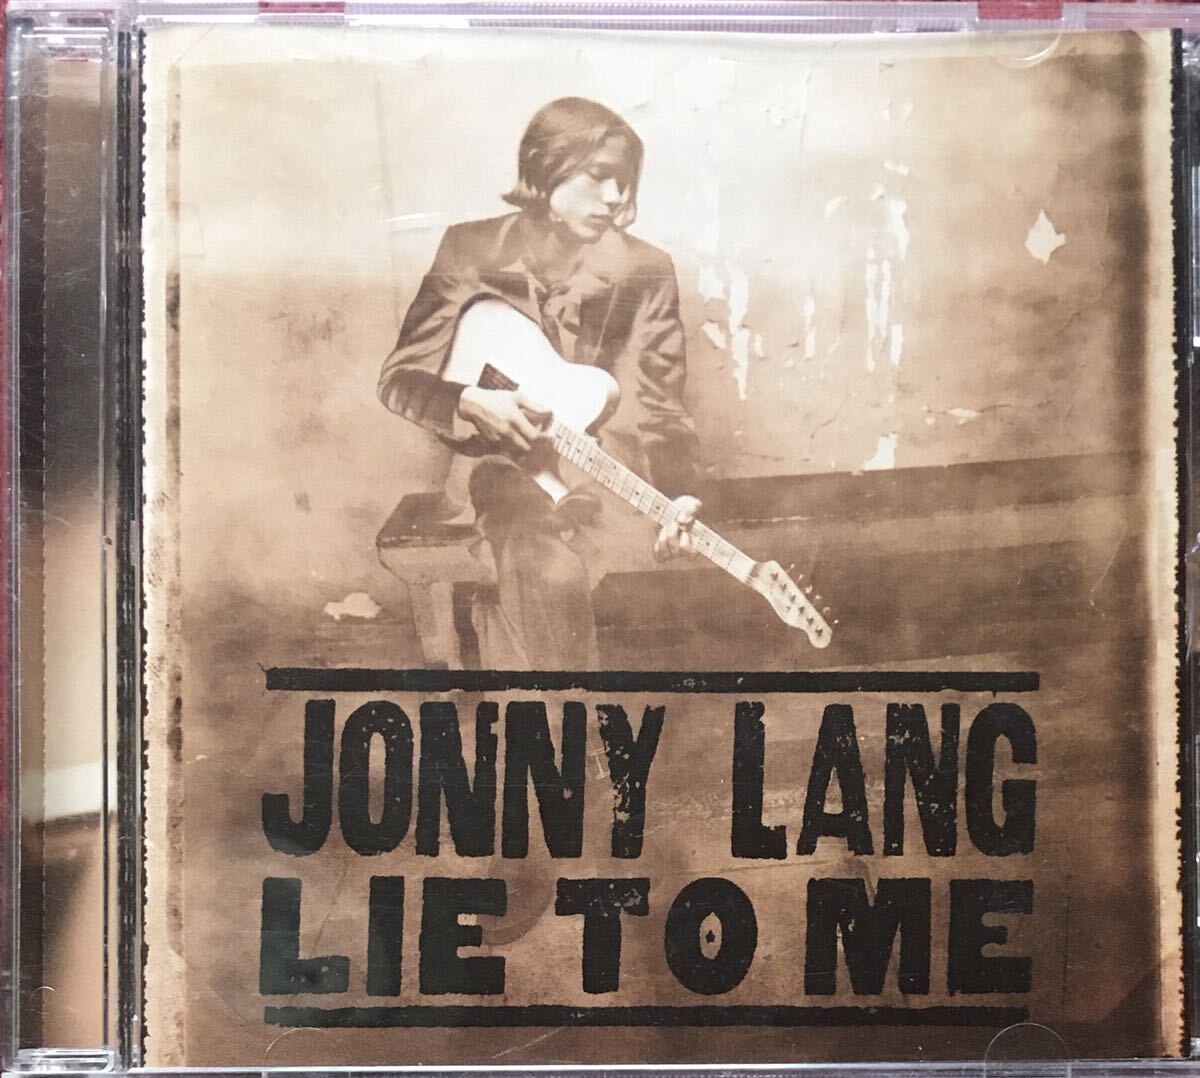 Jonny Lang [Lie To Me] 97年大名盤！/ ブルースロック / ルーツロック / サザンロック / スワンプ / ギタースリンガー_画像1